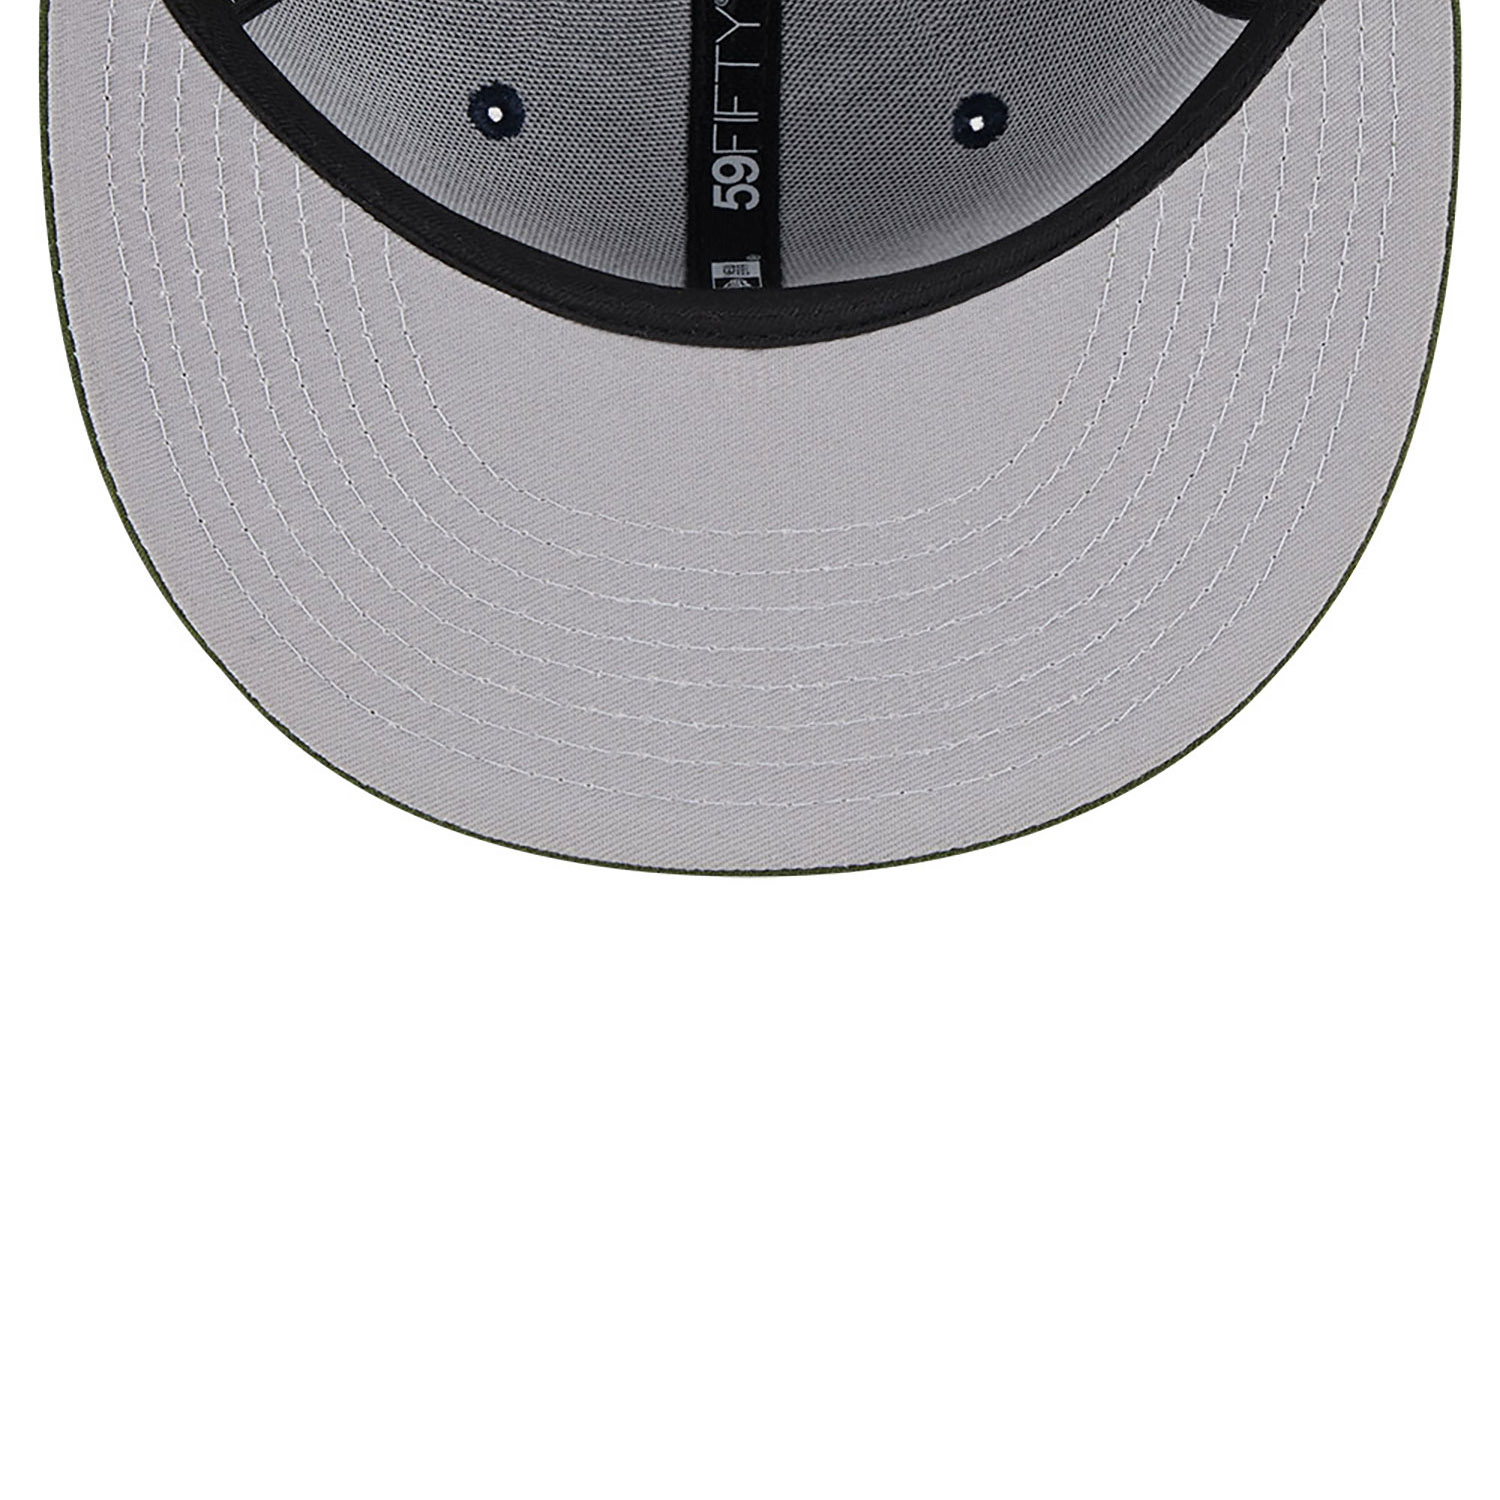 San Diego Padres Sprouted Navy 59FIFTY Fitted Cap